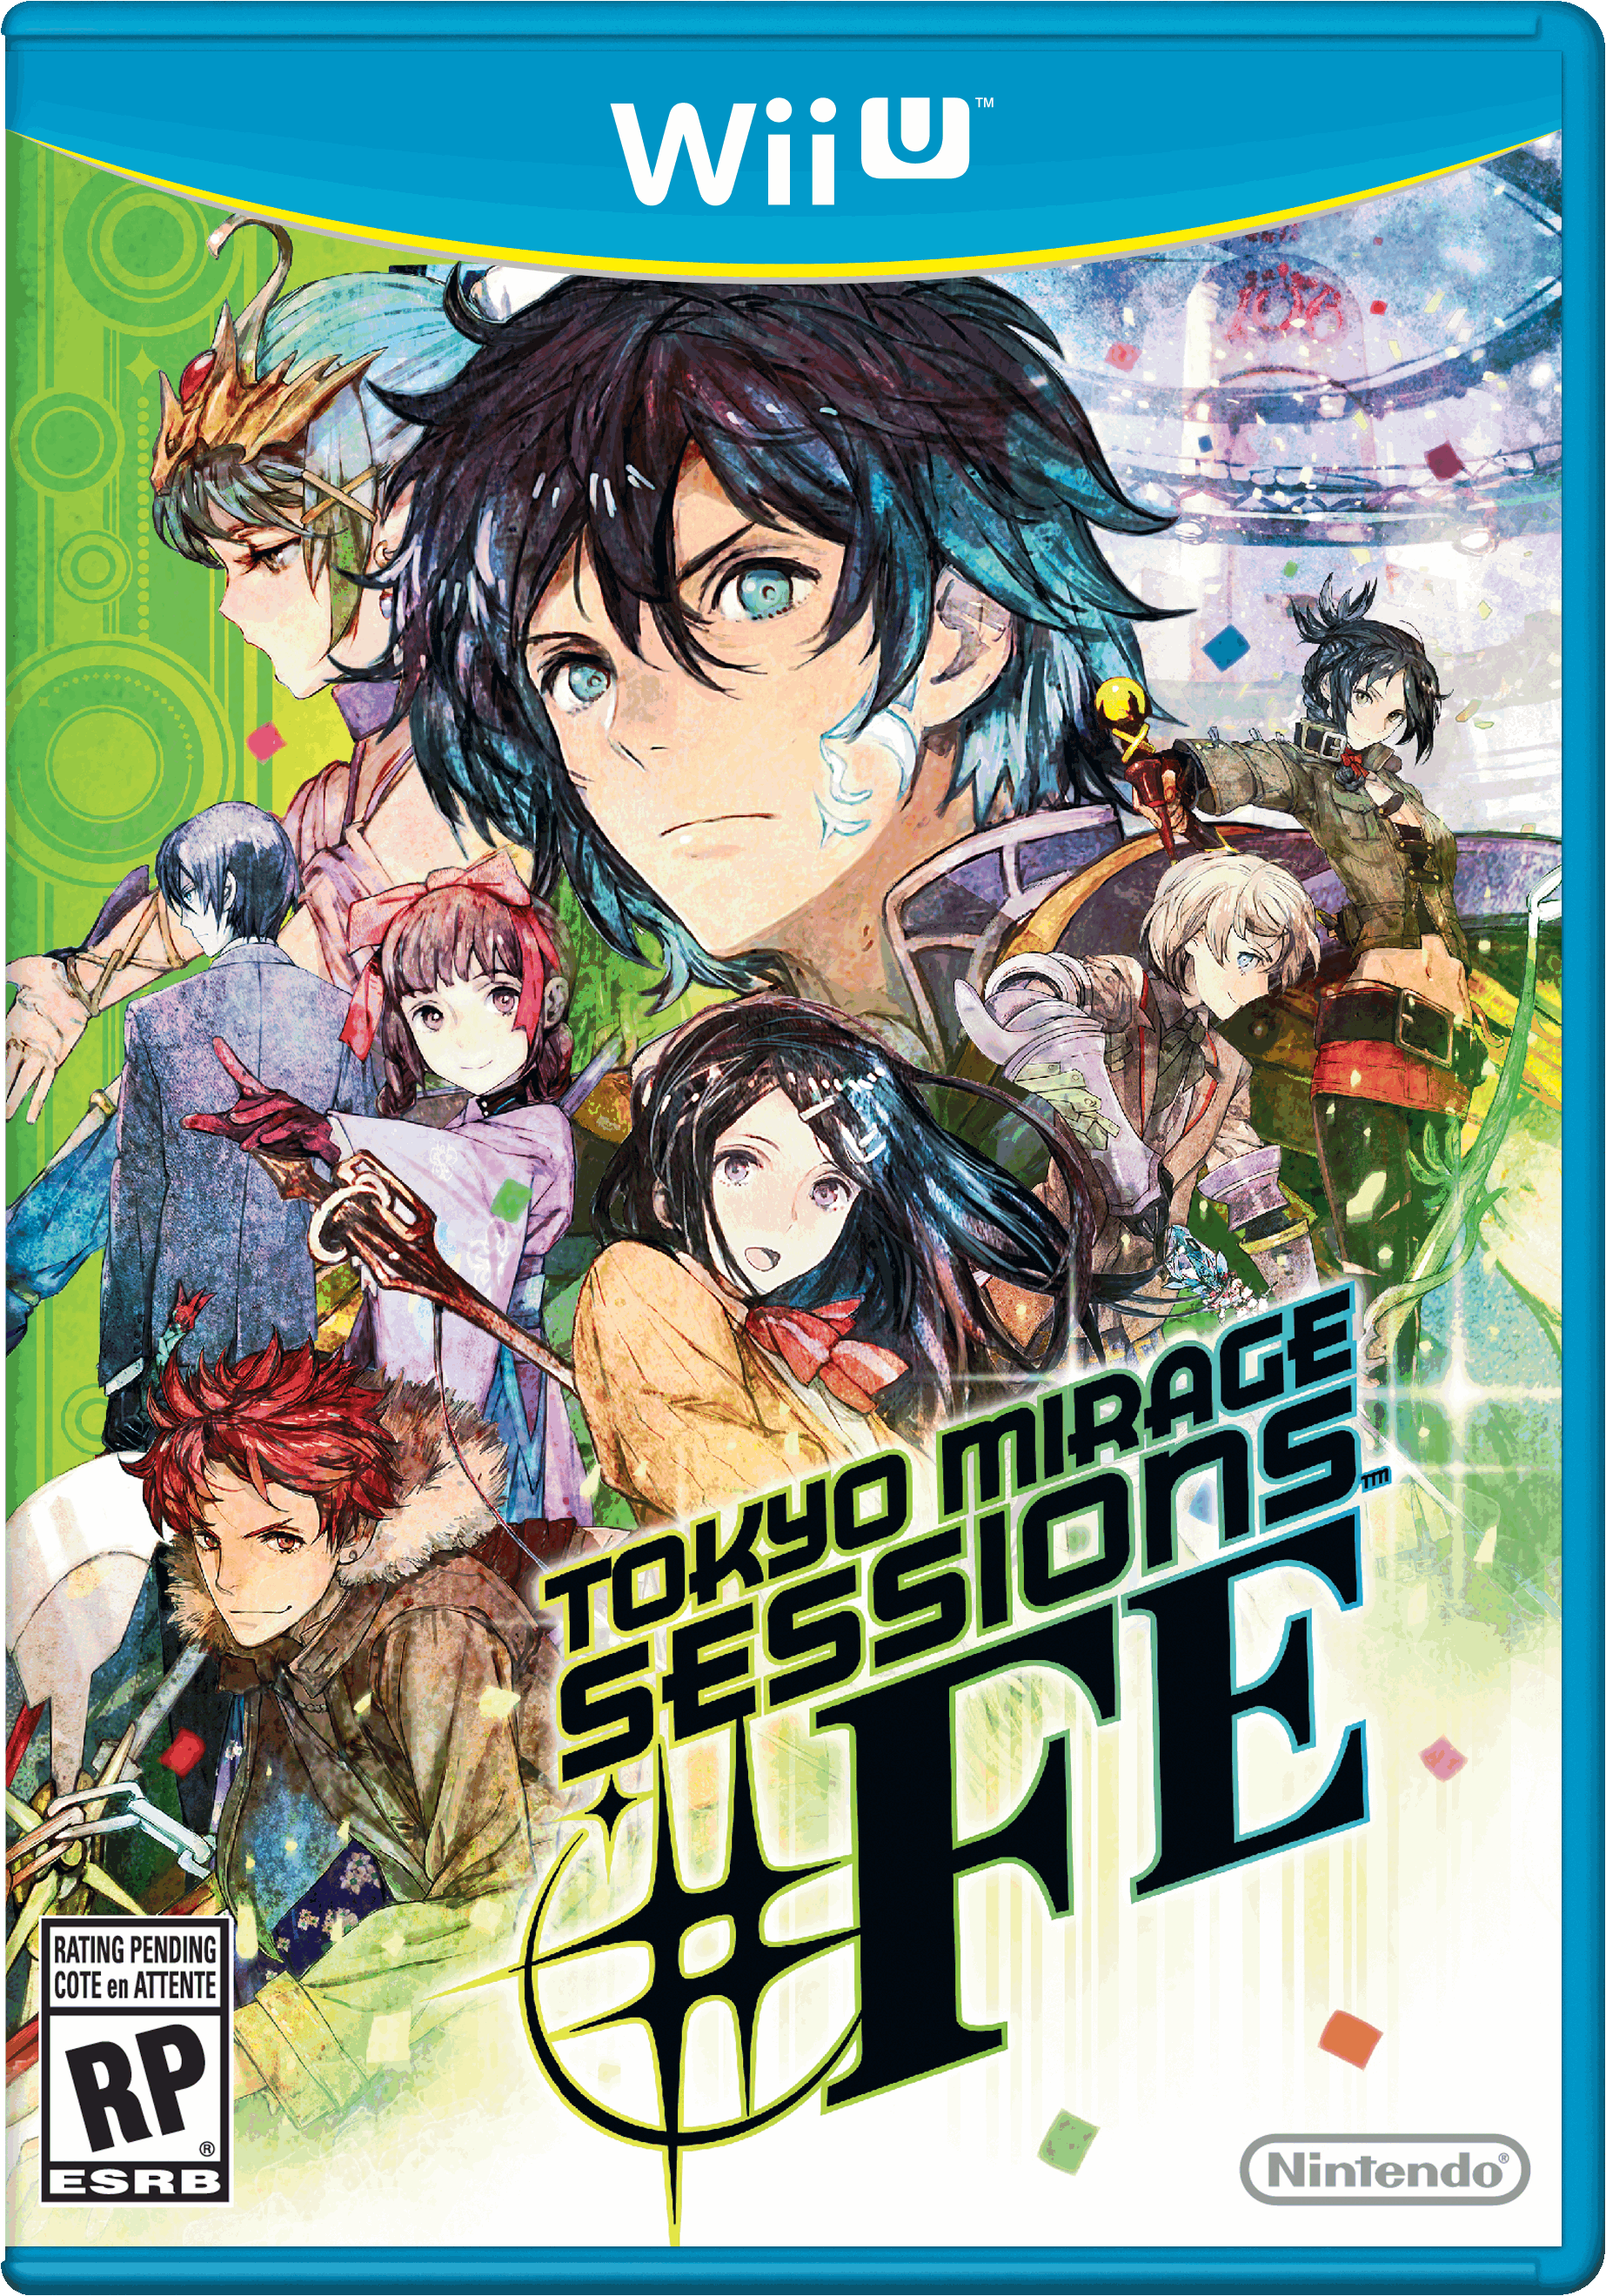 Amazing Tokyo Mirage Sessions #FE Pictures & Backgrounds